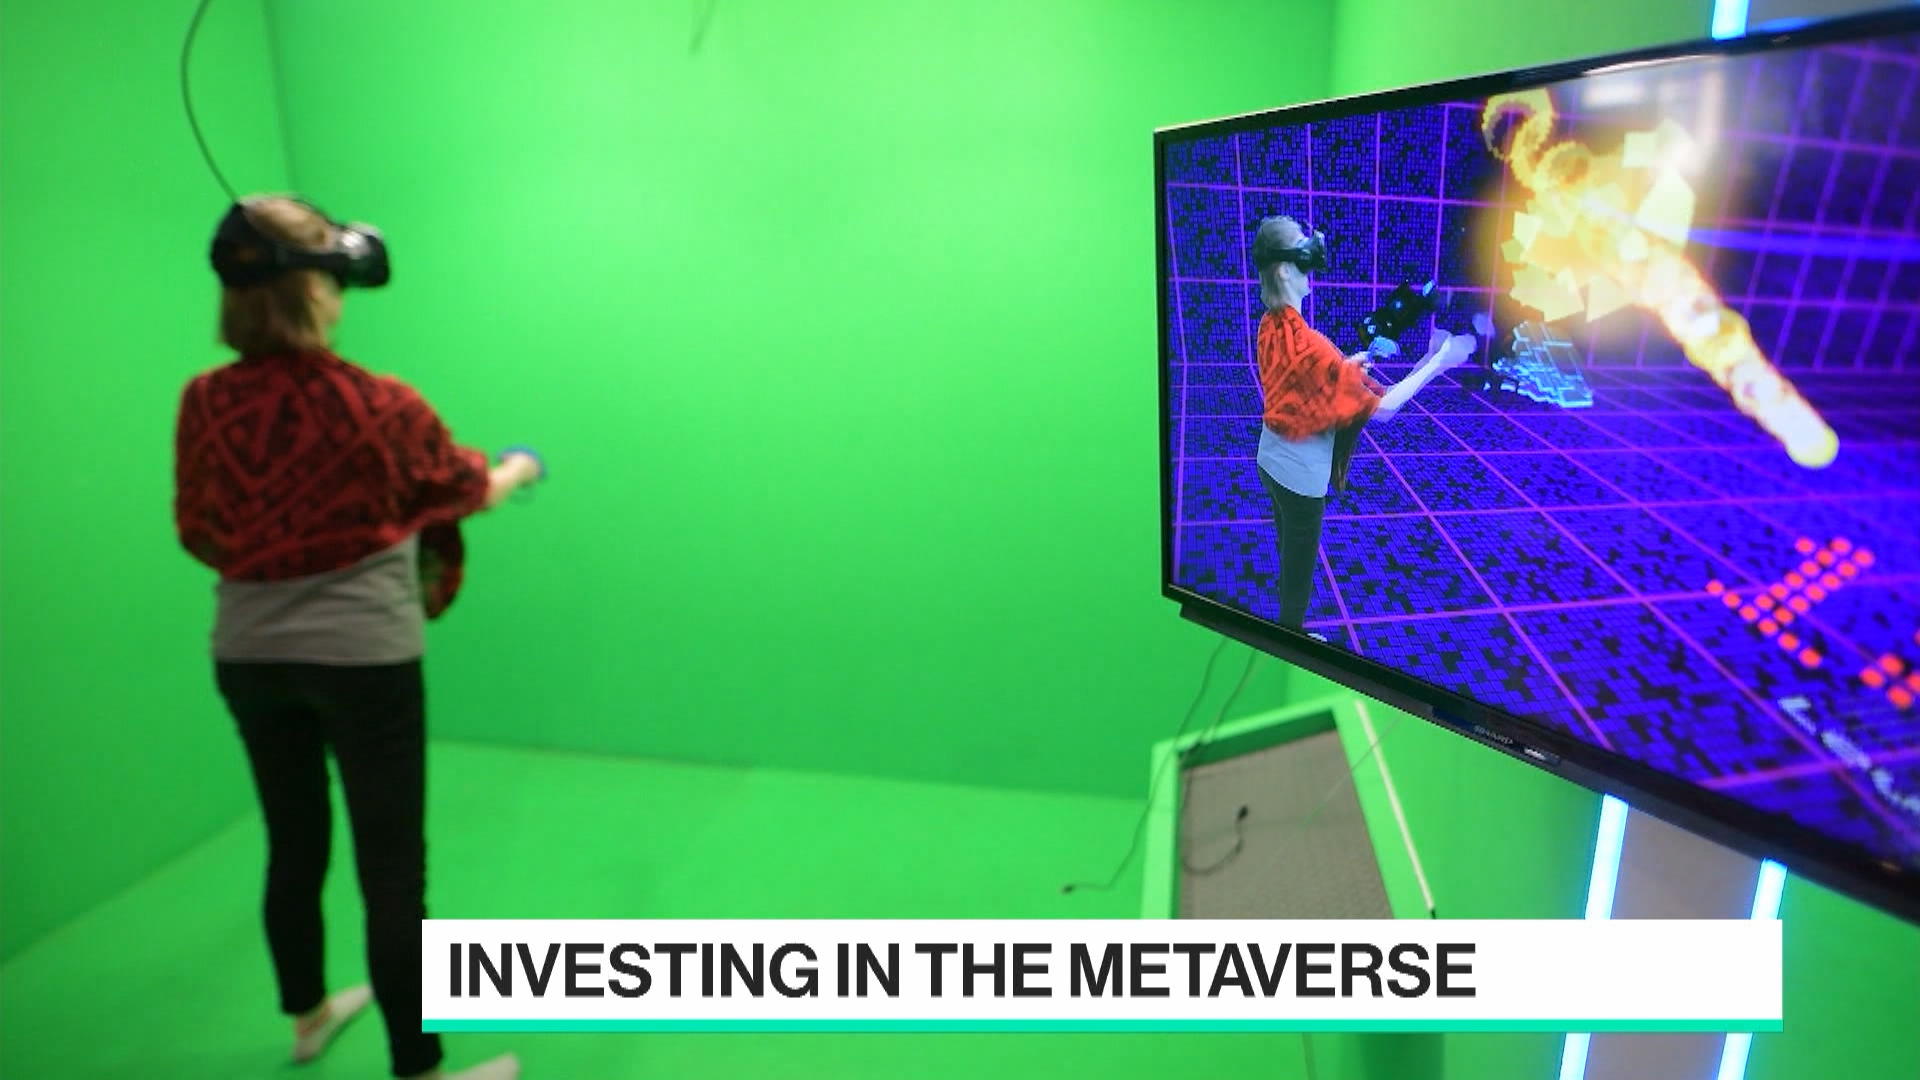 Investing in the “Metaverse”